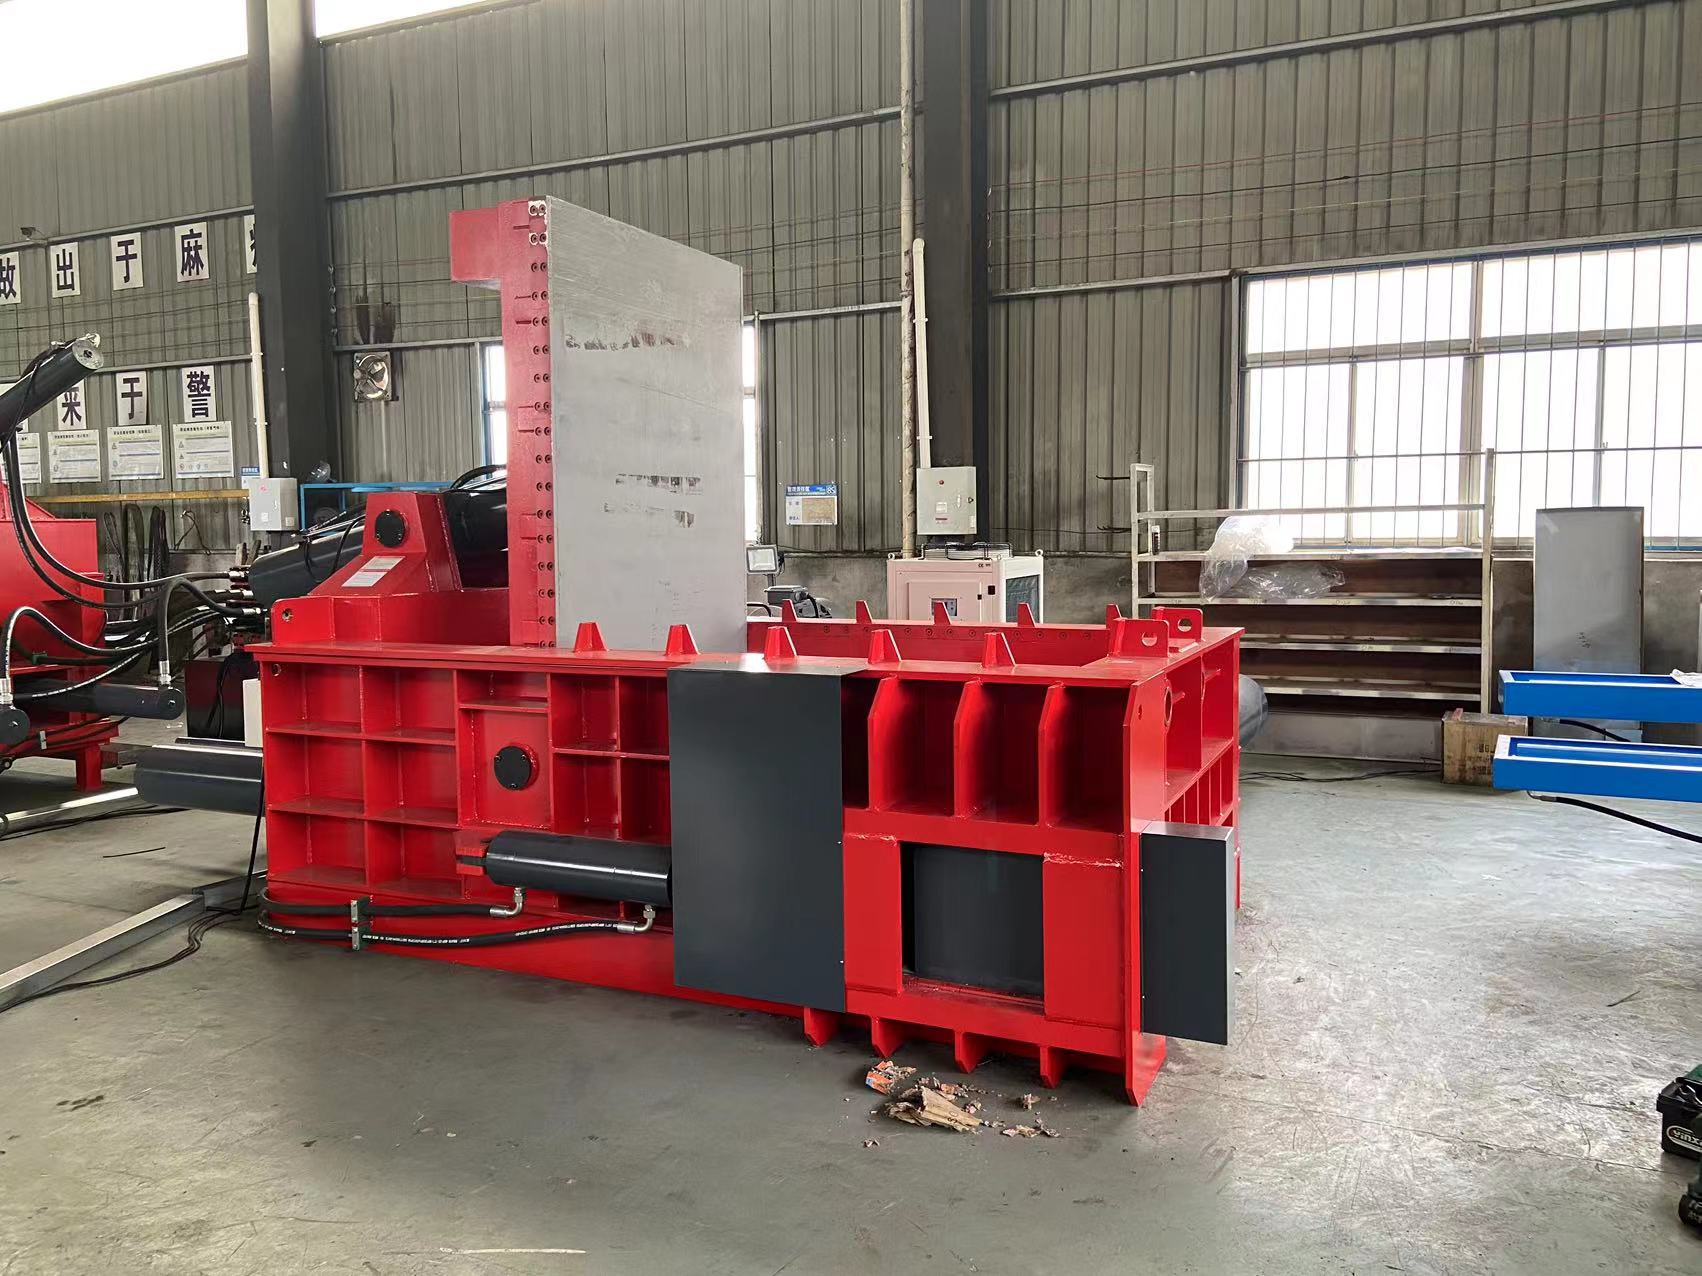 ENERPAT AMB-L2014-250T Automatic Metal Baler on the way to Europe